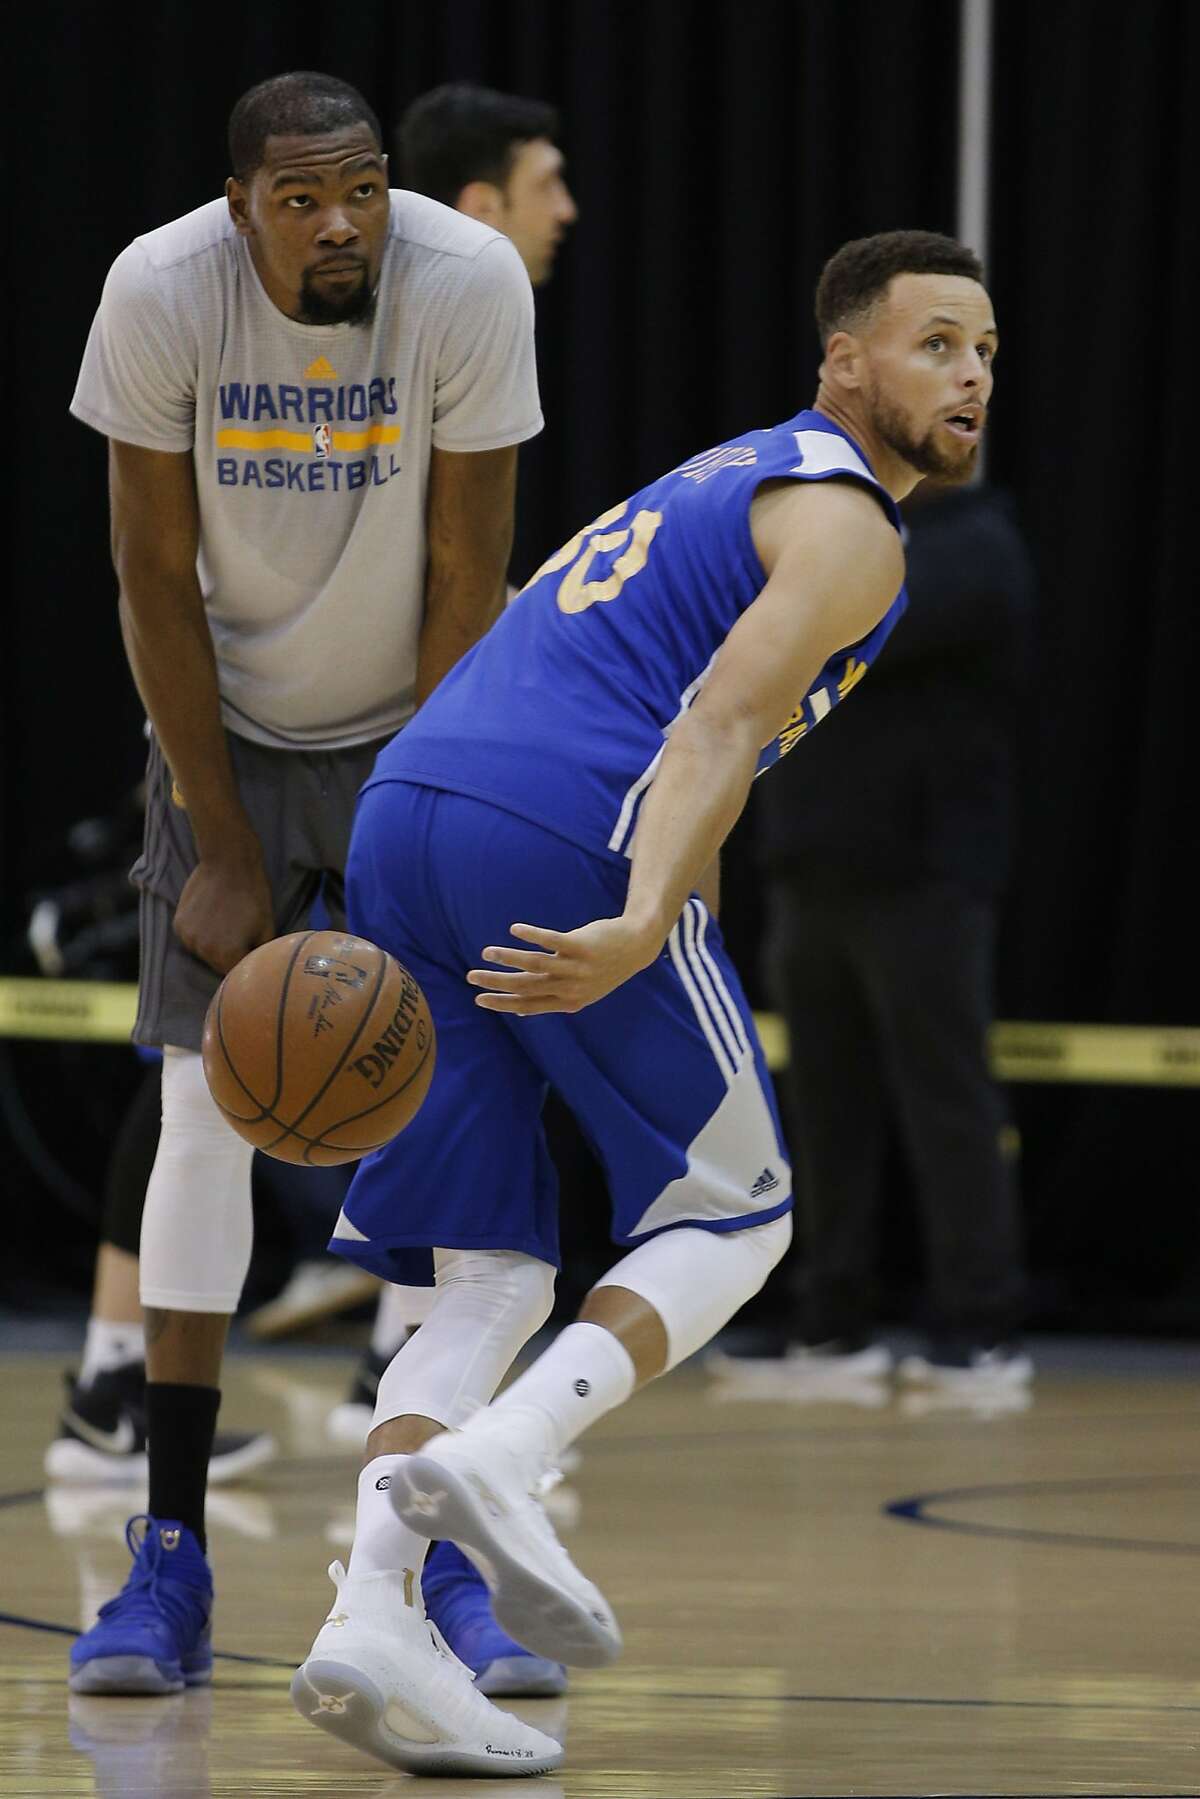 Golden State Warriors guard Stephen Curry (30) and forward Kevin Durant (35) practice together at the Warriors practice facility on Saturday, June 3, 2017, in Oakland, Calif. In the NBA Finals, the Warriors lead the series 1-0 against the Cleveland Cavaliers. They play Game 2 on Sunday.